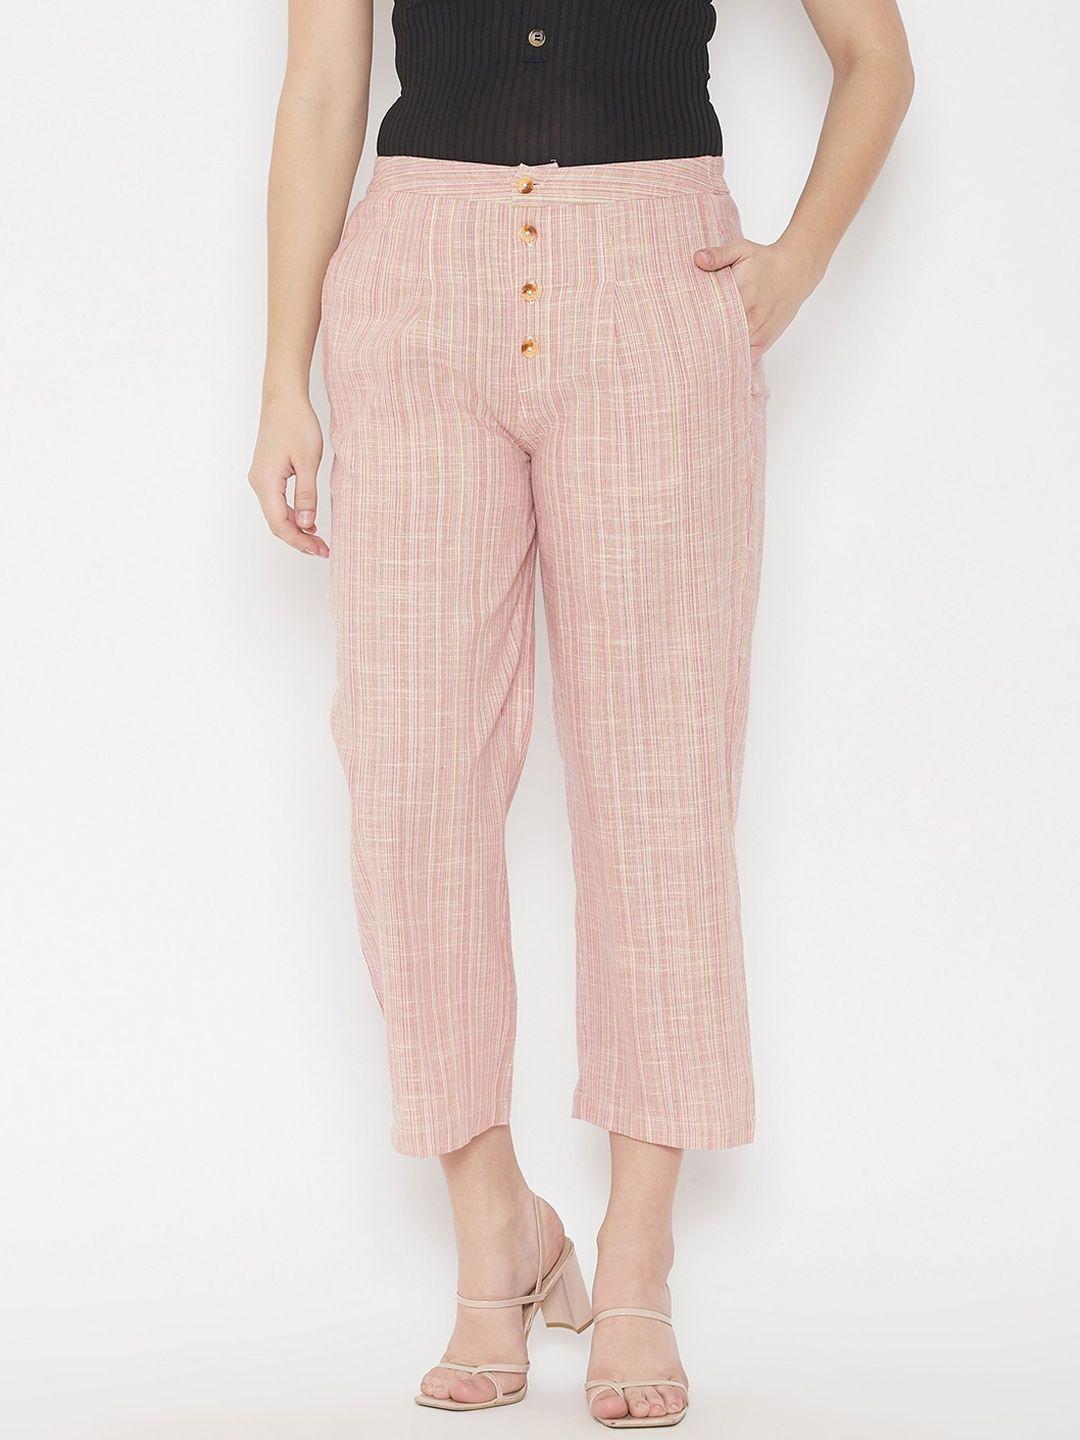 winered-women-pink-striped-trousers